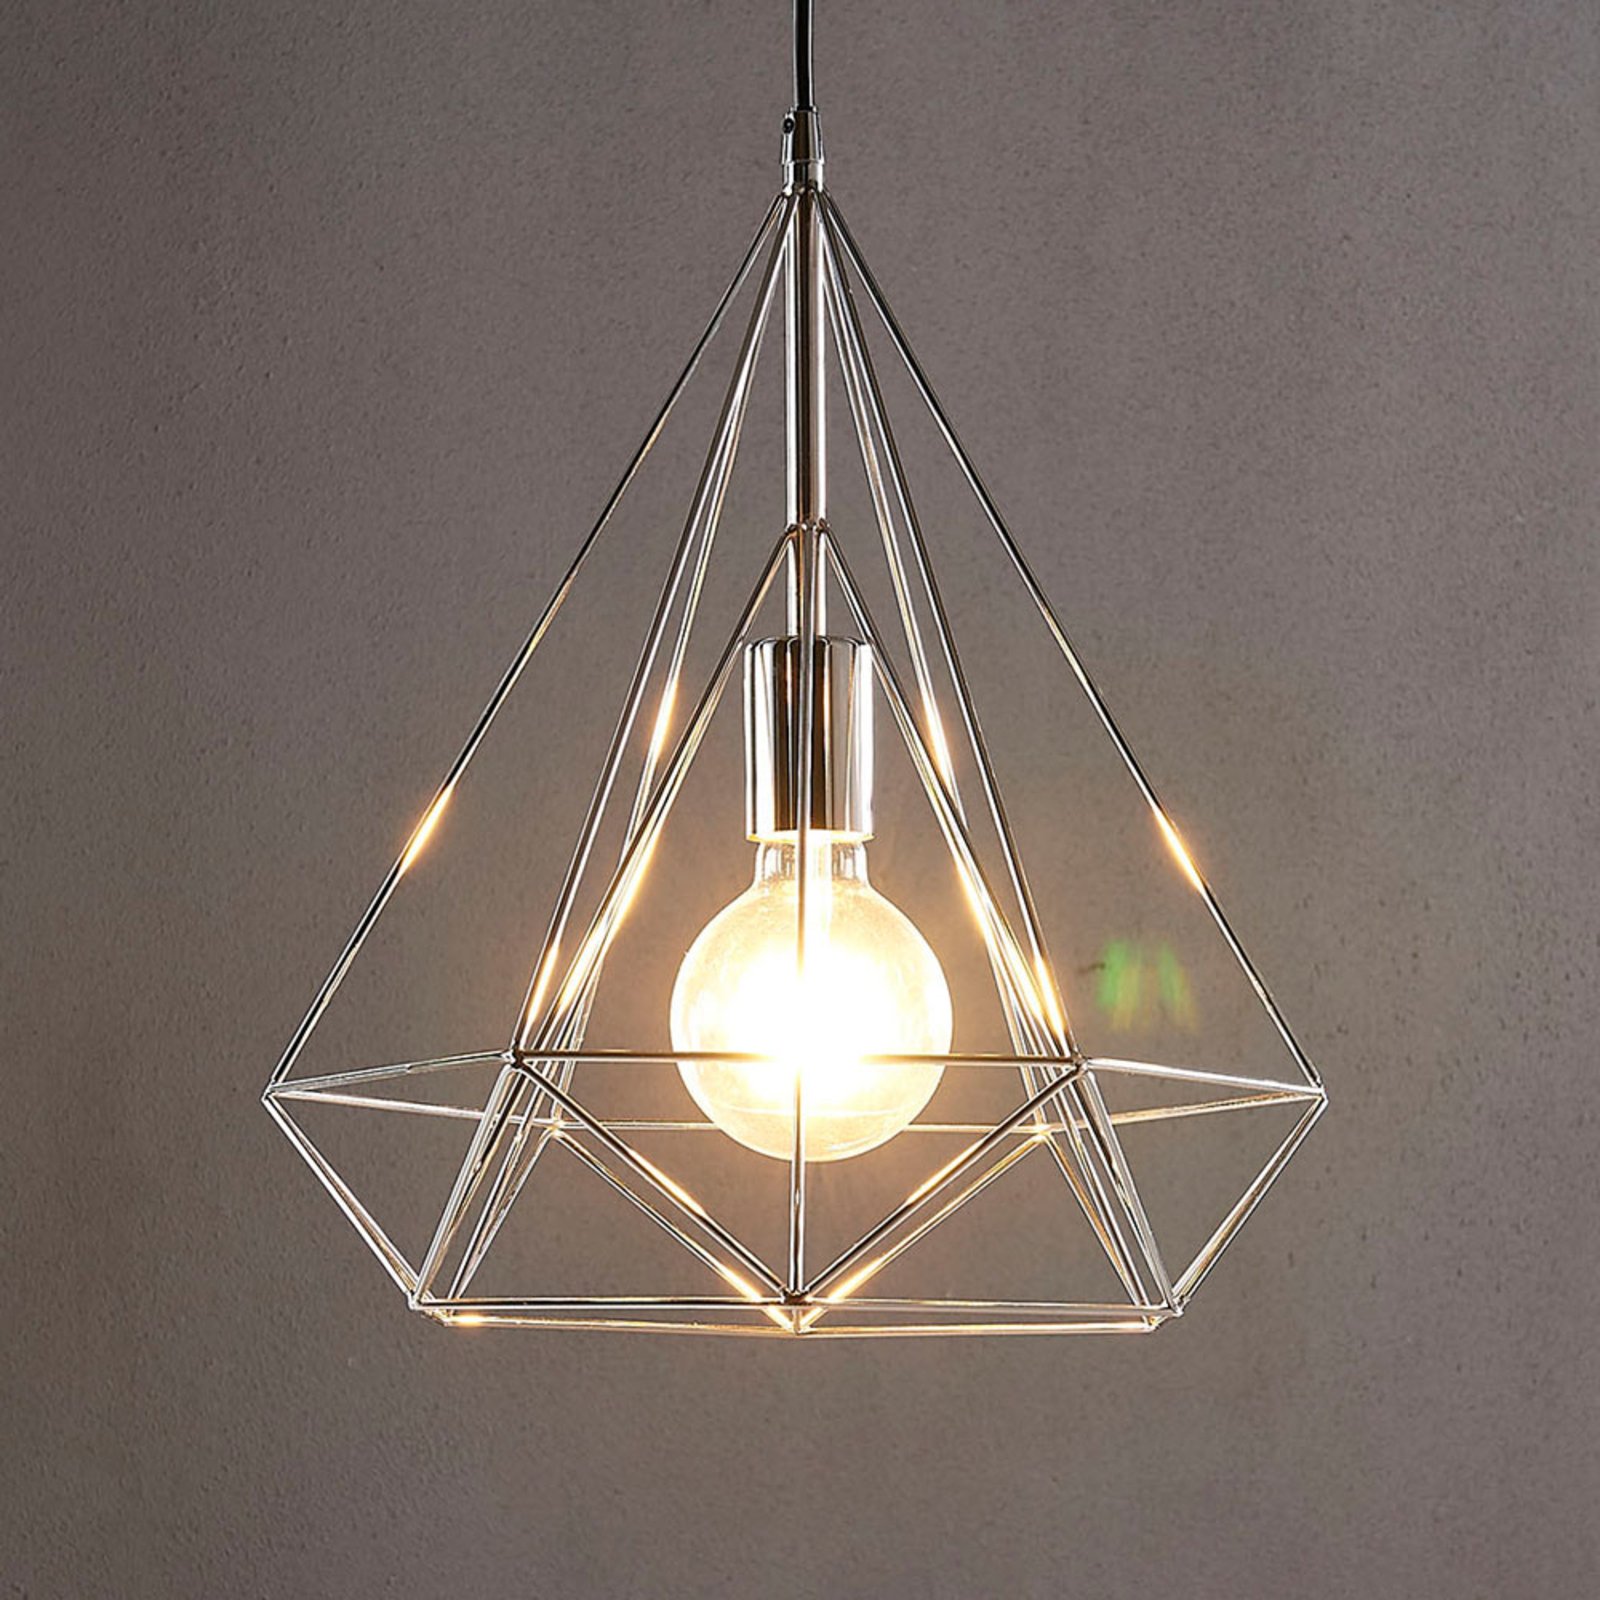 Chrome-plated pendant light Nael in cage shape